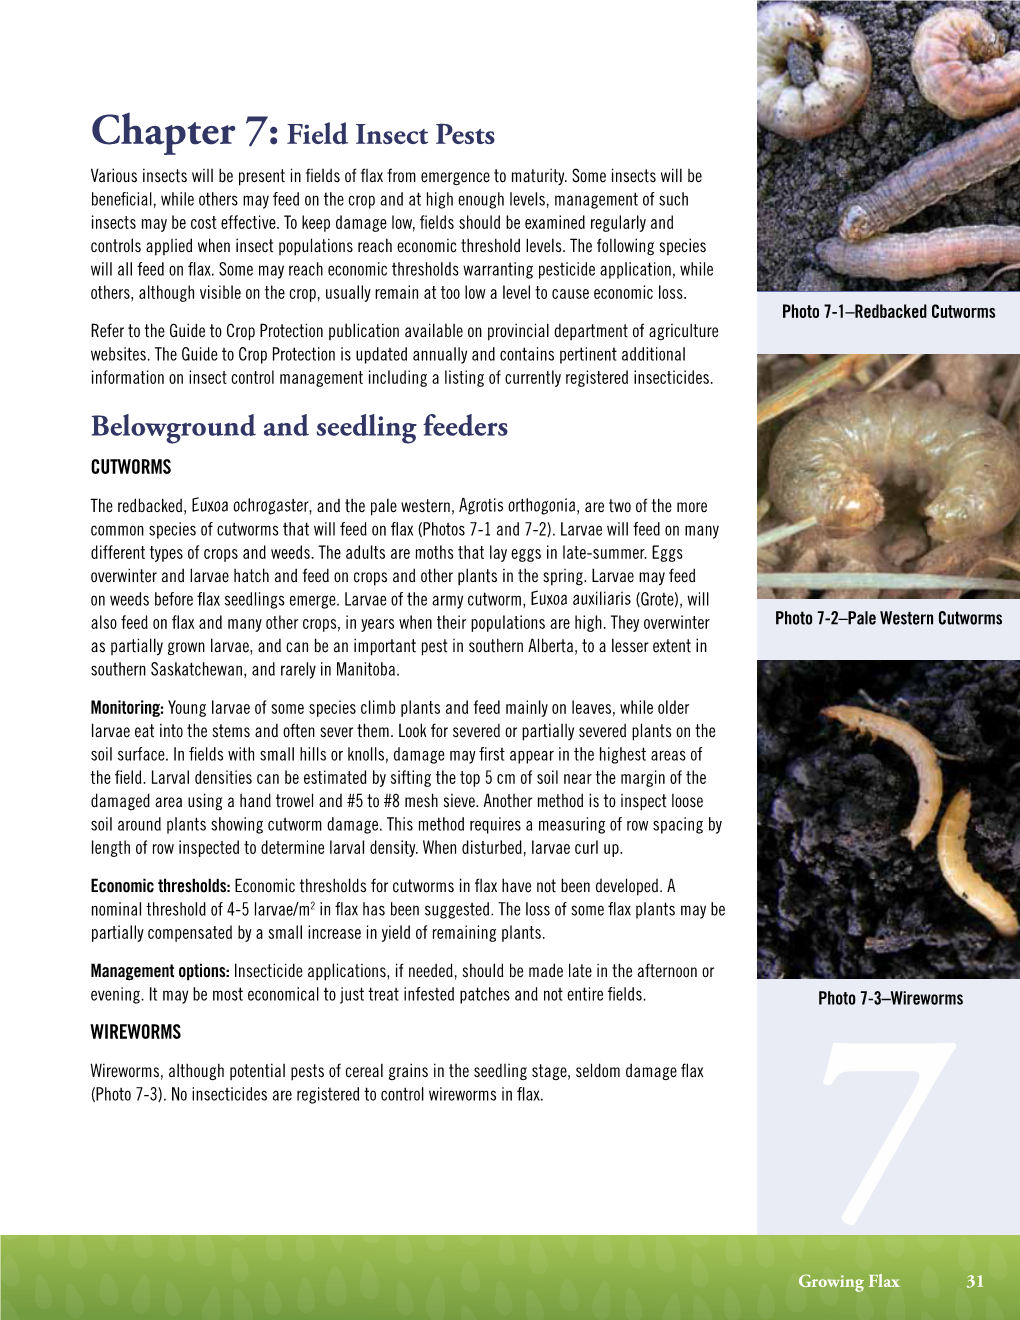 Chapter 7:Field Insect Pests Belowground and Seedling Feeders